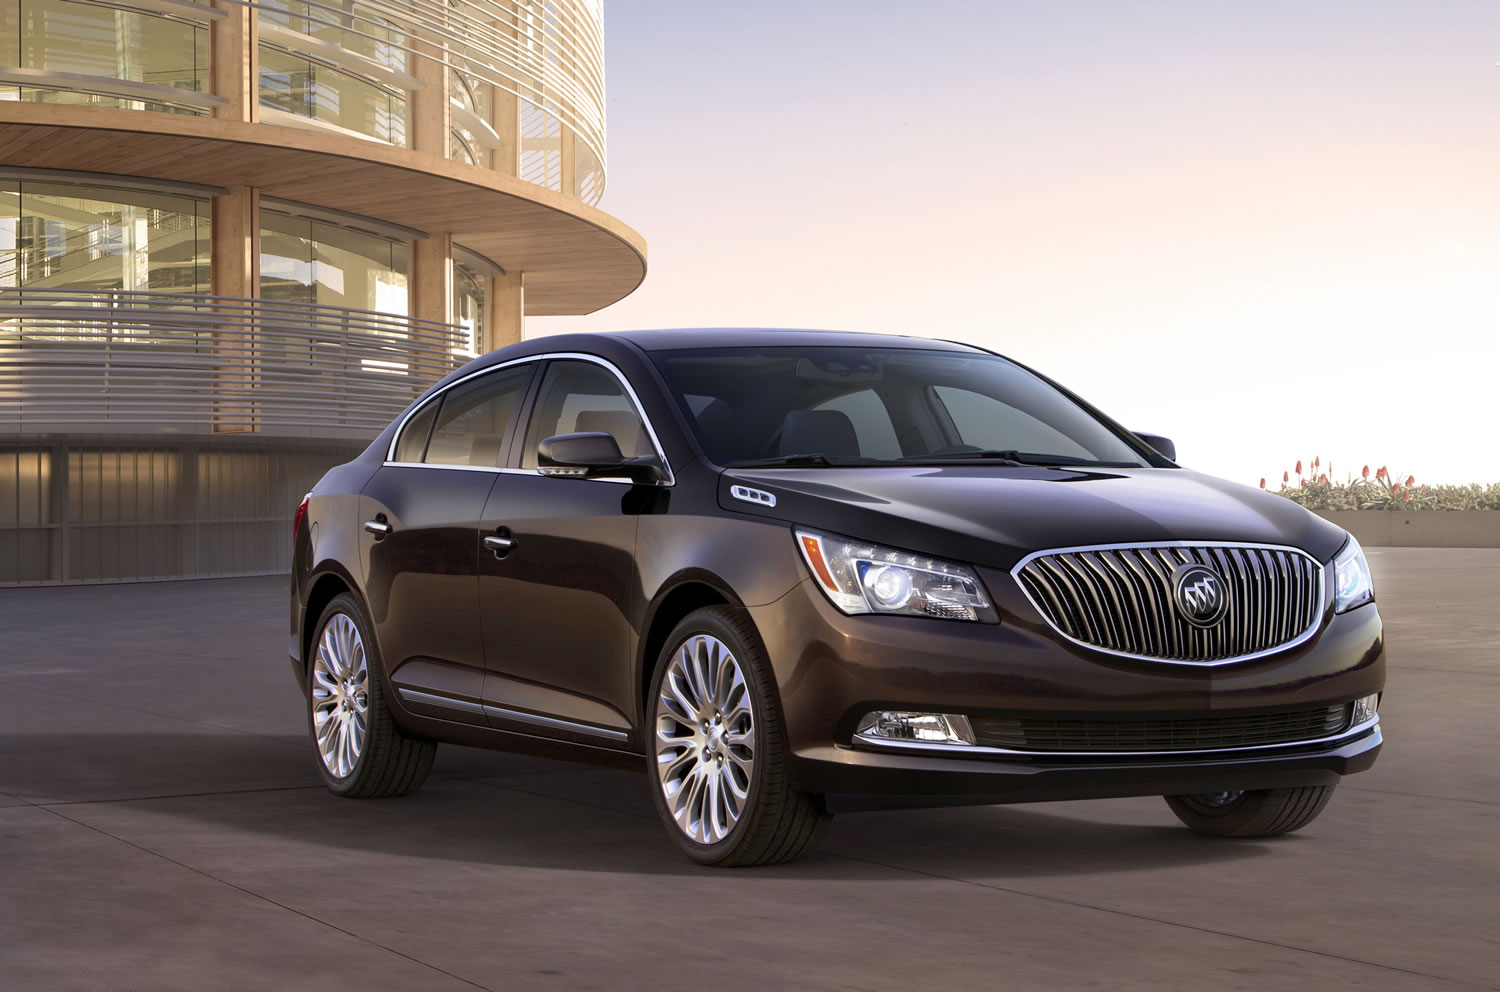 GM is taking the latest step on its seemingly quixotic quest to revive the Buick brand in the U.S., rolling out refurbished versions of the midsize Regal and the larger LaCrosse, shown here.